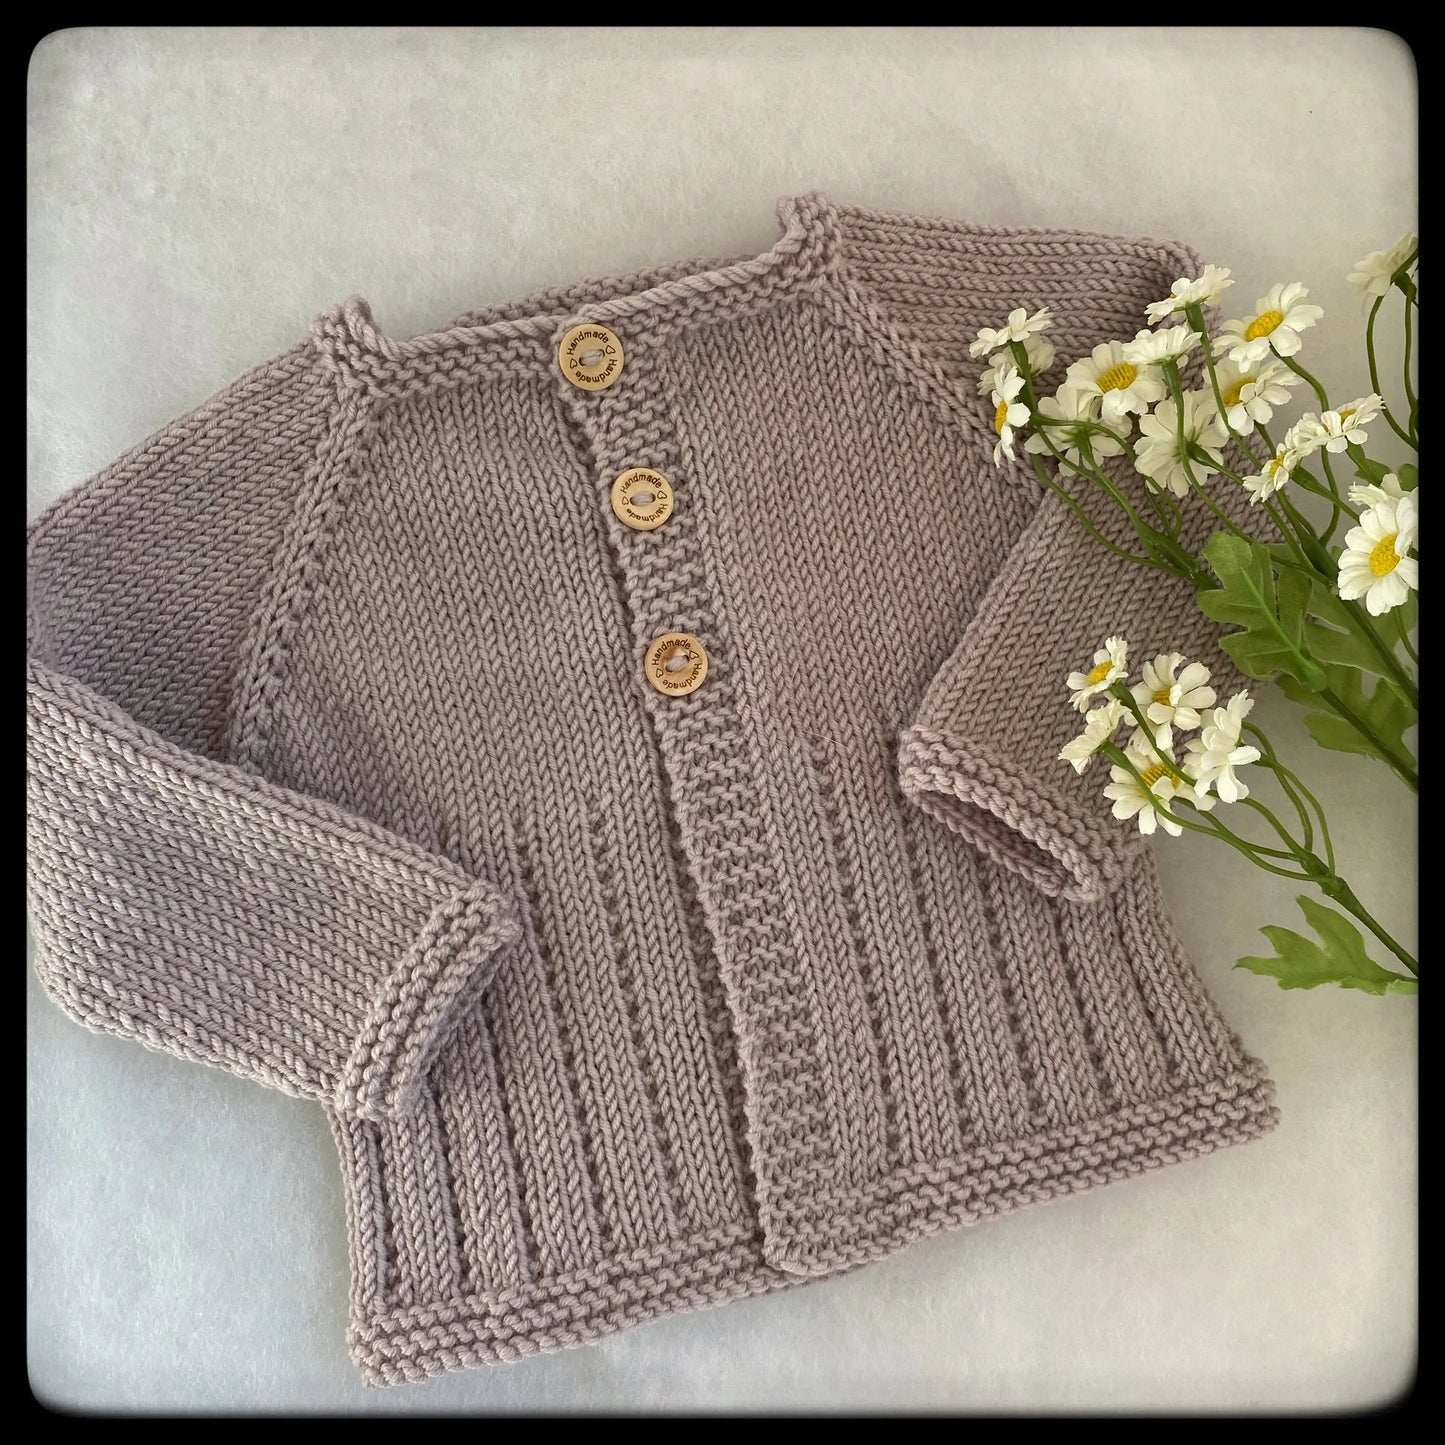 "jj" patterned cardigan 0-3 months : 44cm chest : shell